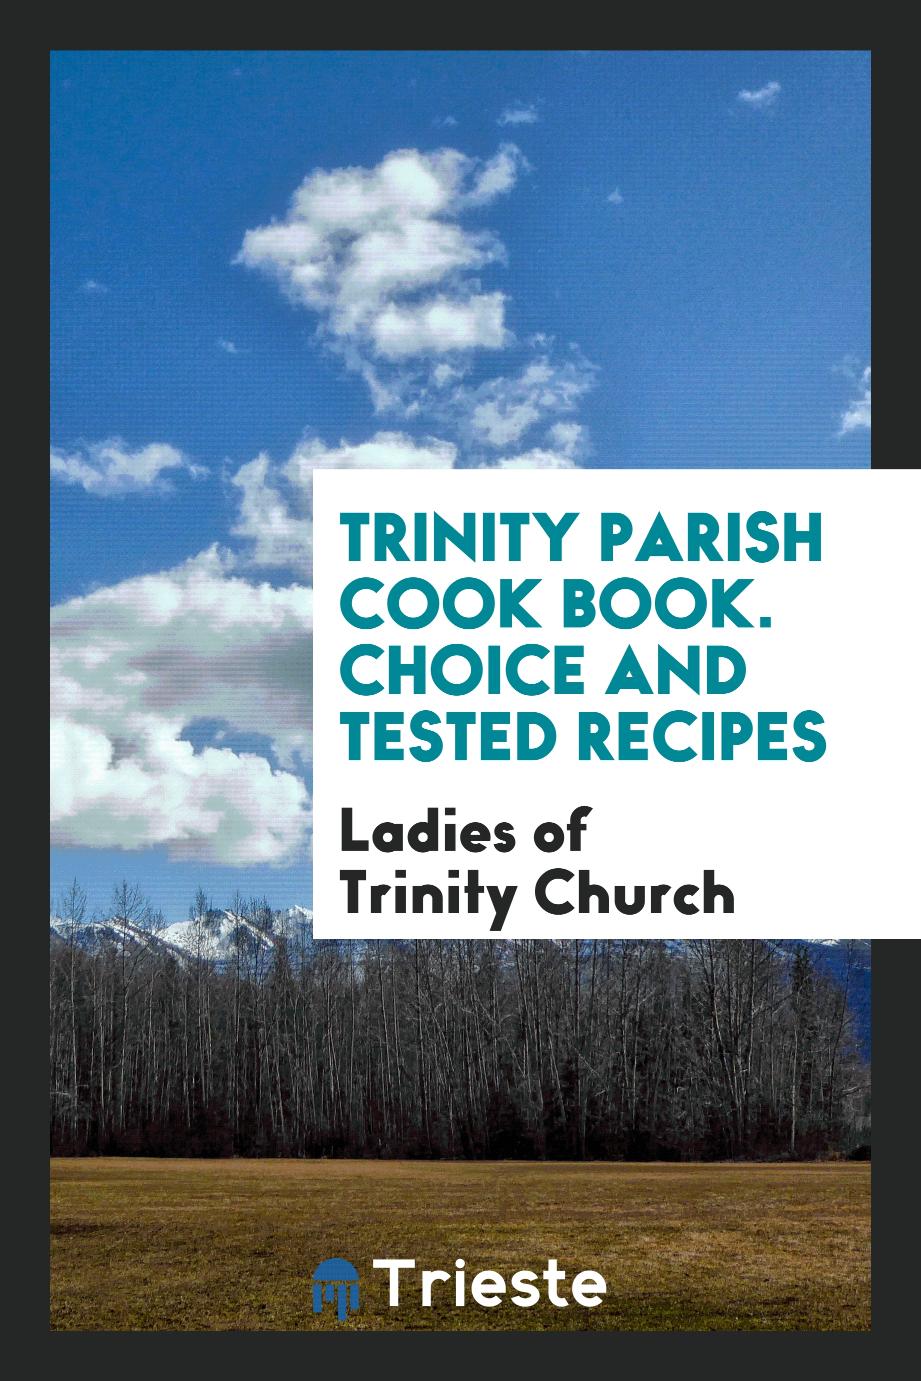 Trinity parish cook book. Choice and Tested Recipes